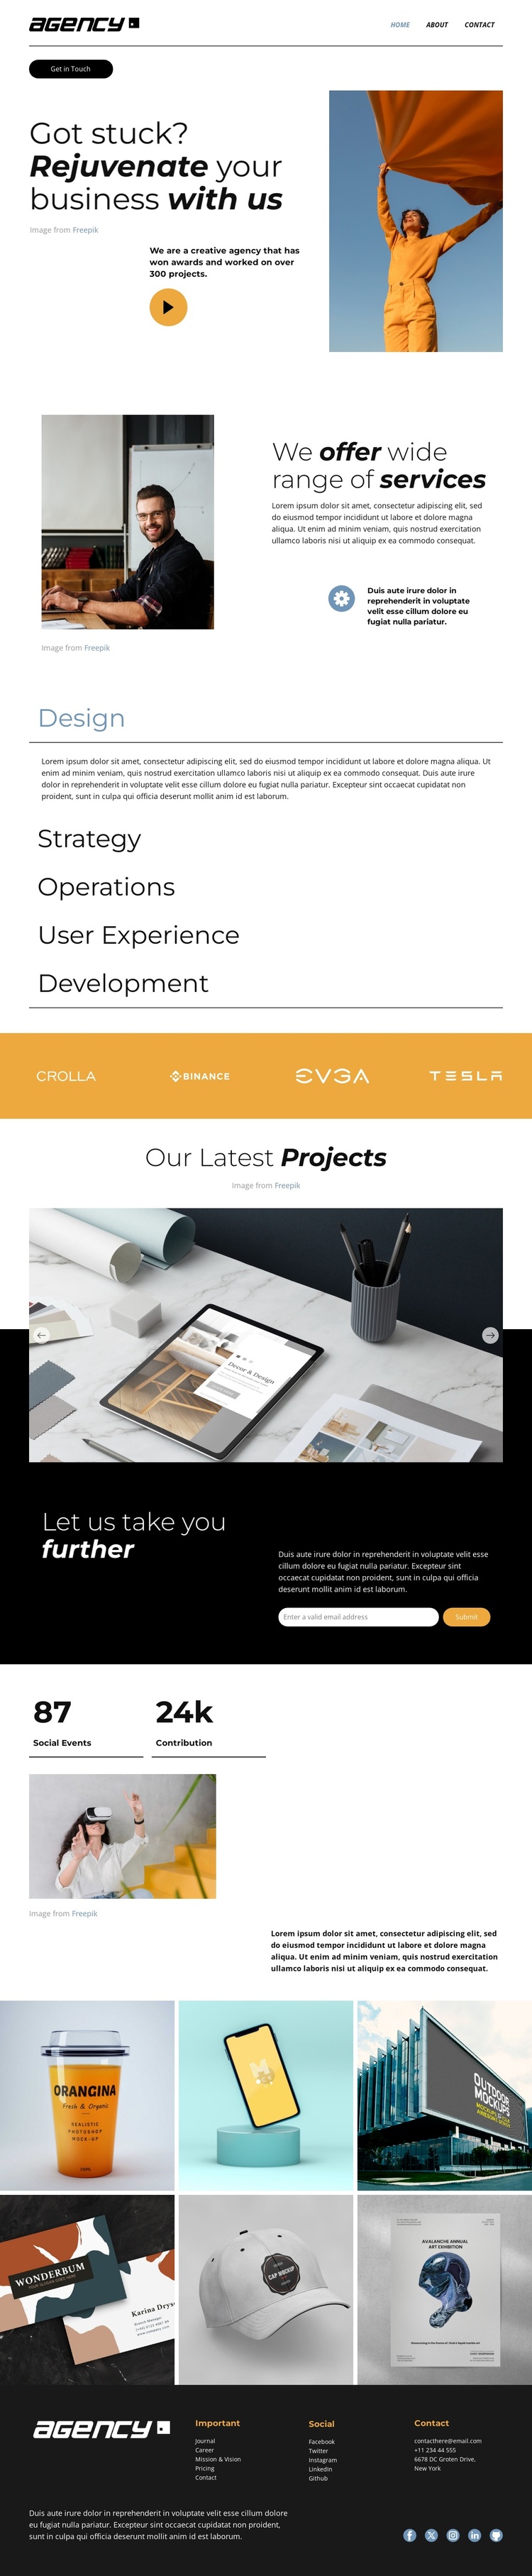 Scale to greater success Joomla Template